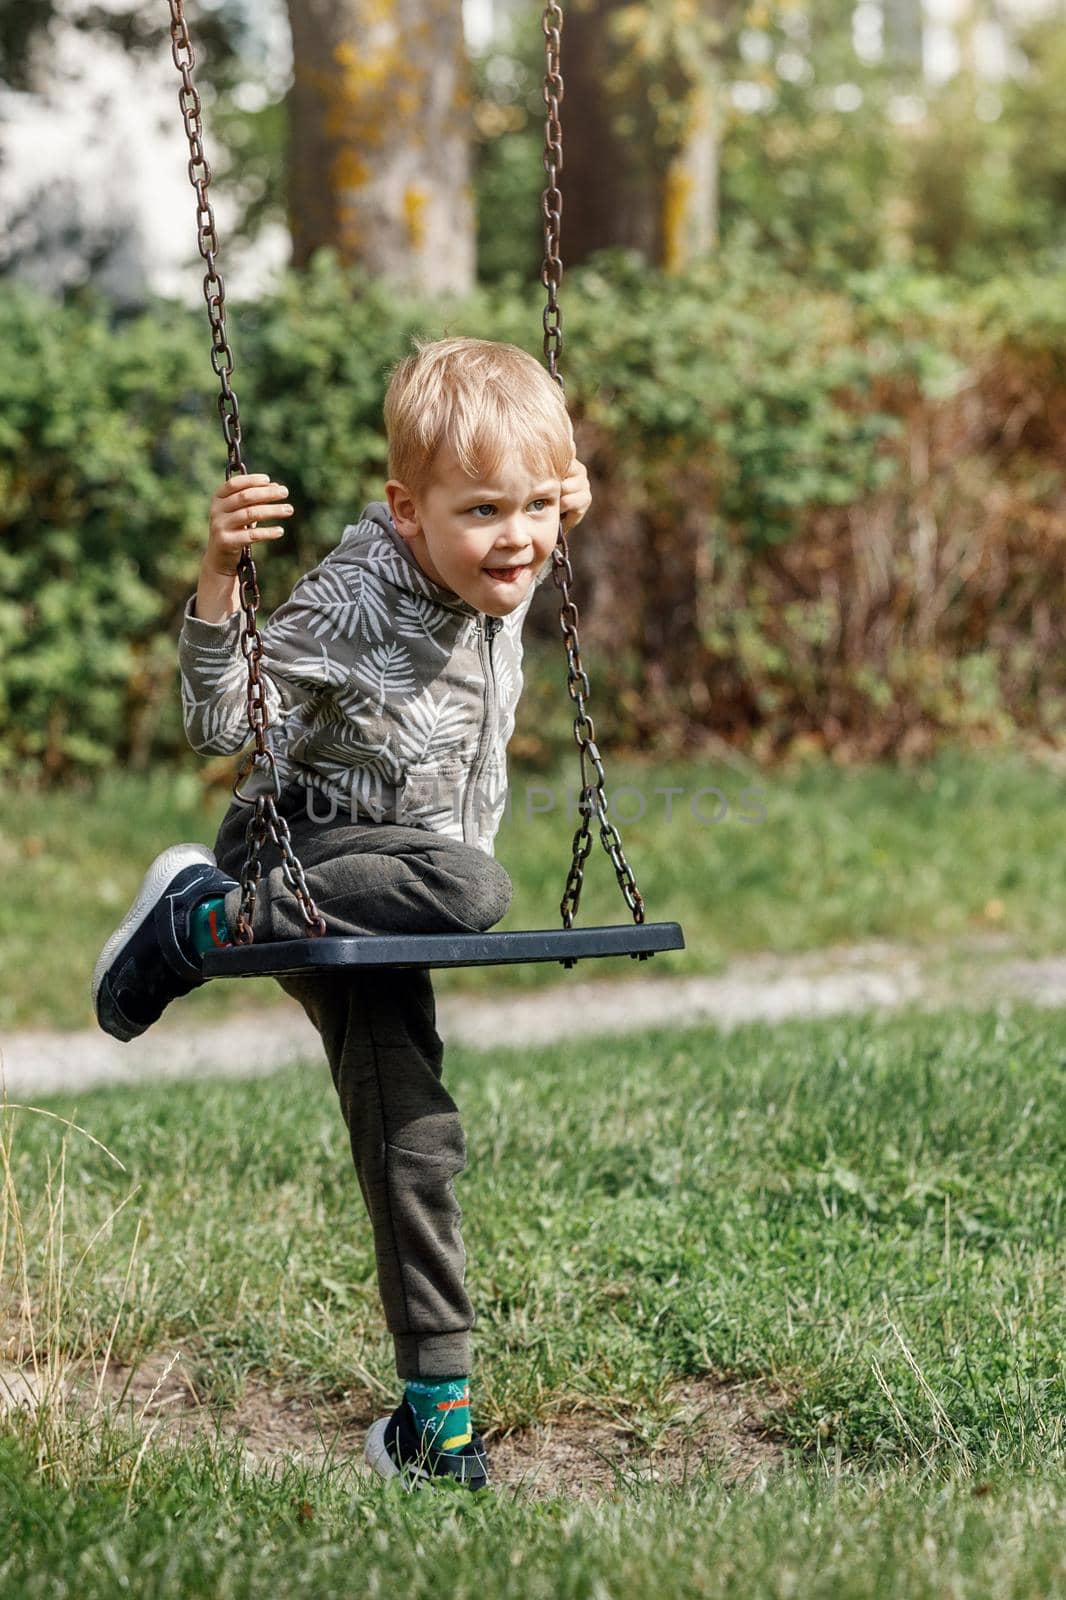 The blond boy plays with a chain swing as he tries to climb on it without his parents help. by Lincikas